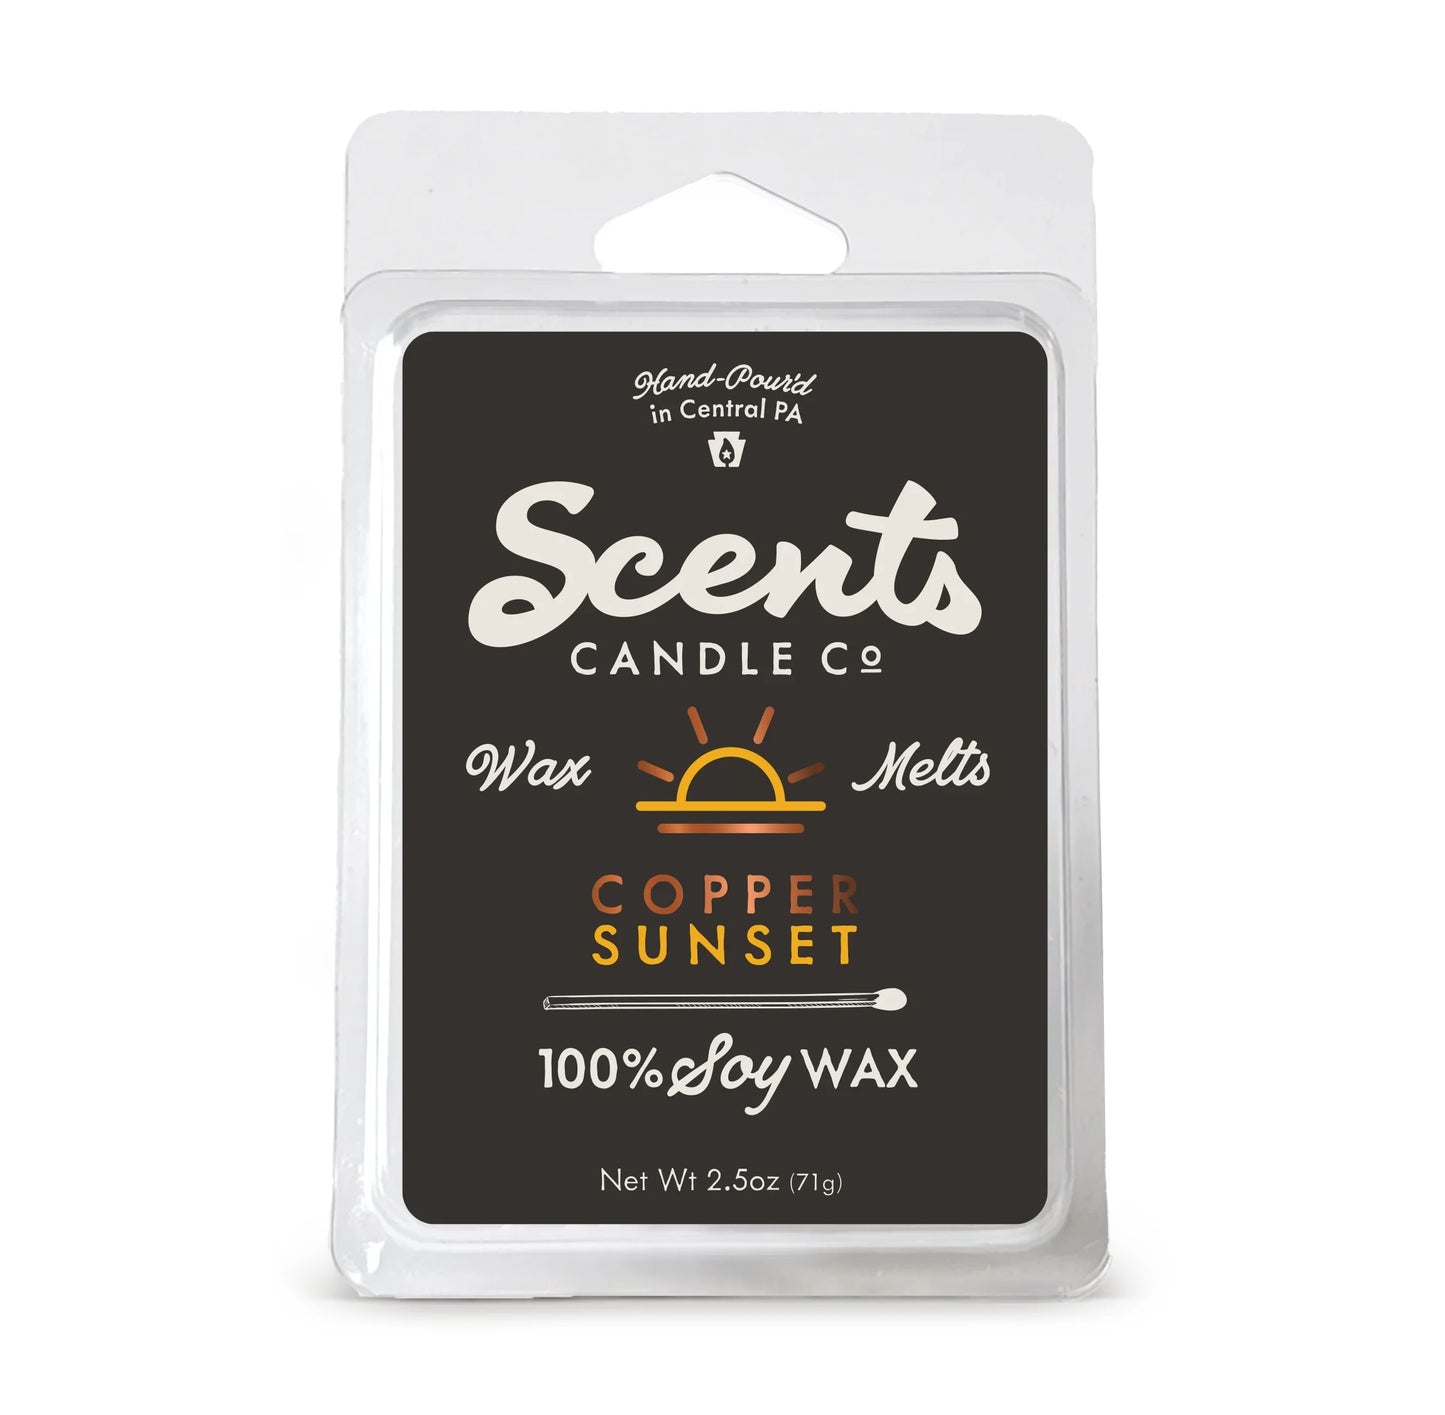 Scents Candle Co. Copper Sunset Wax Melt